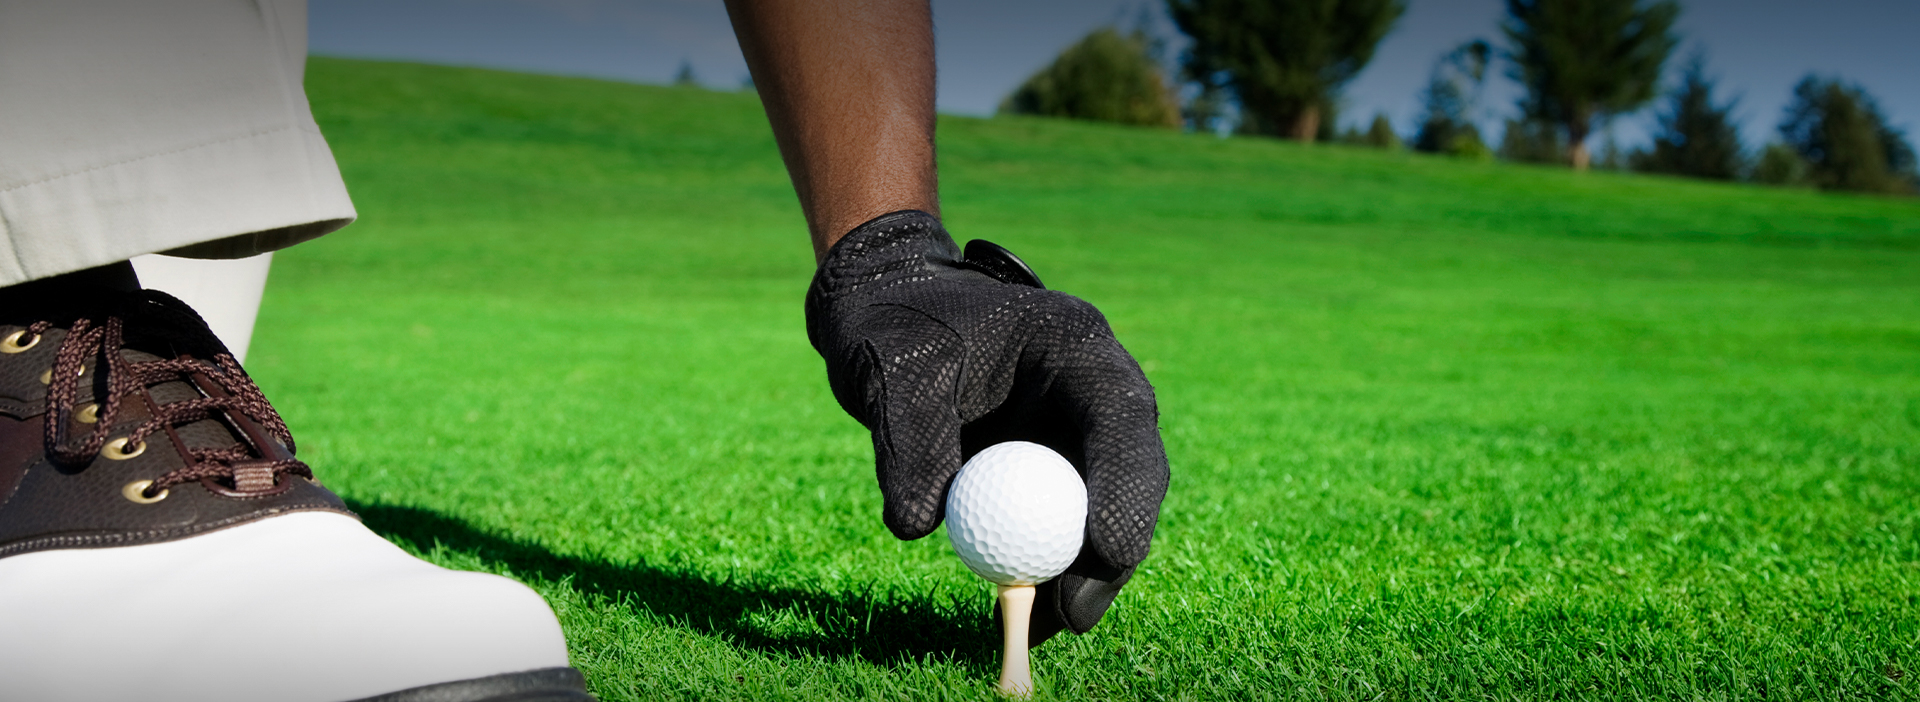 The hand of a person putting a golf ball on a tee